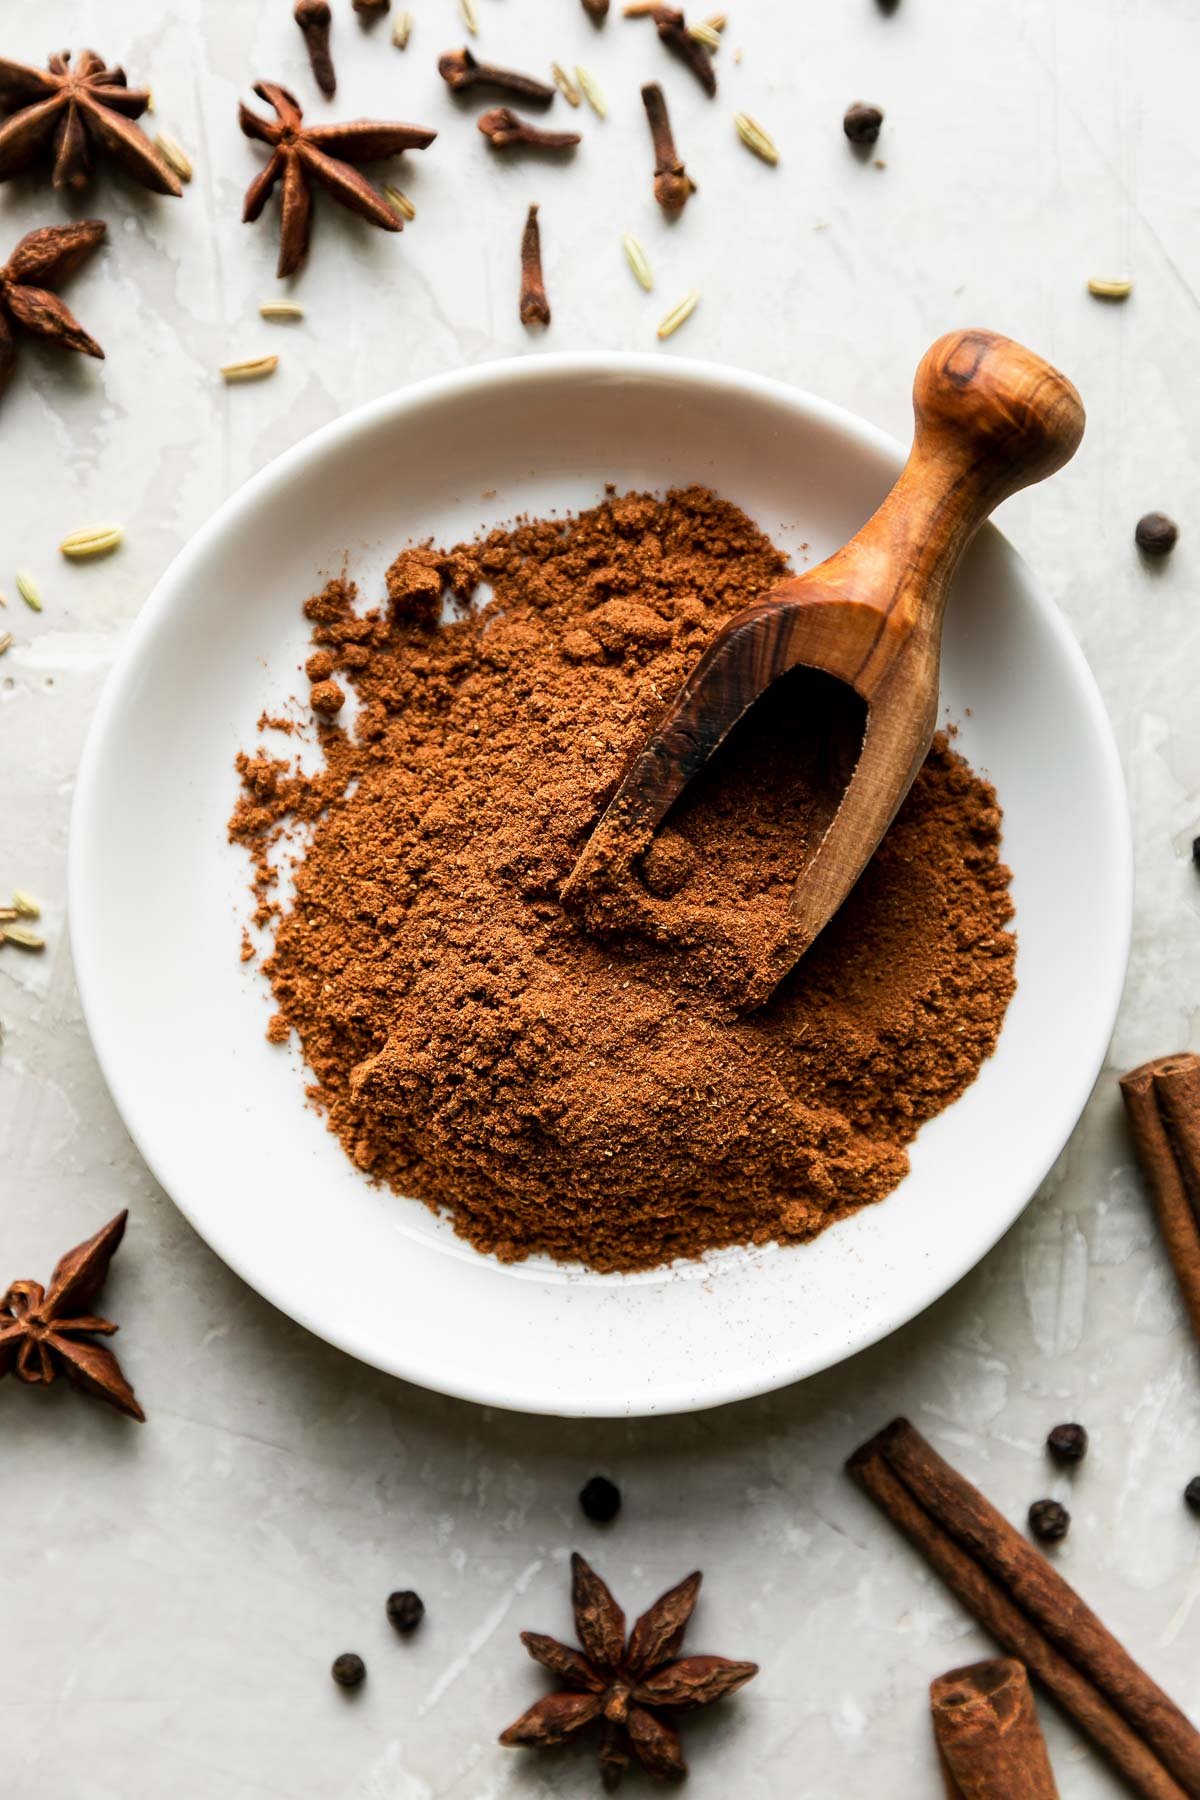 Ground Chinese five spice in a white shallow bowl atop a creamy white textured surface. A wooden scoop rests inside of the ground Chinese five spice with whole spices: cinnamon, cloves, fennel, & star anise surrounding.